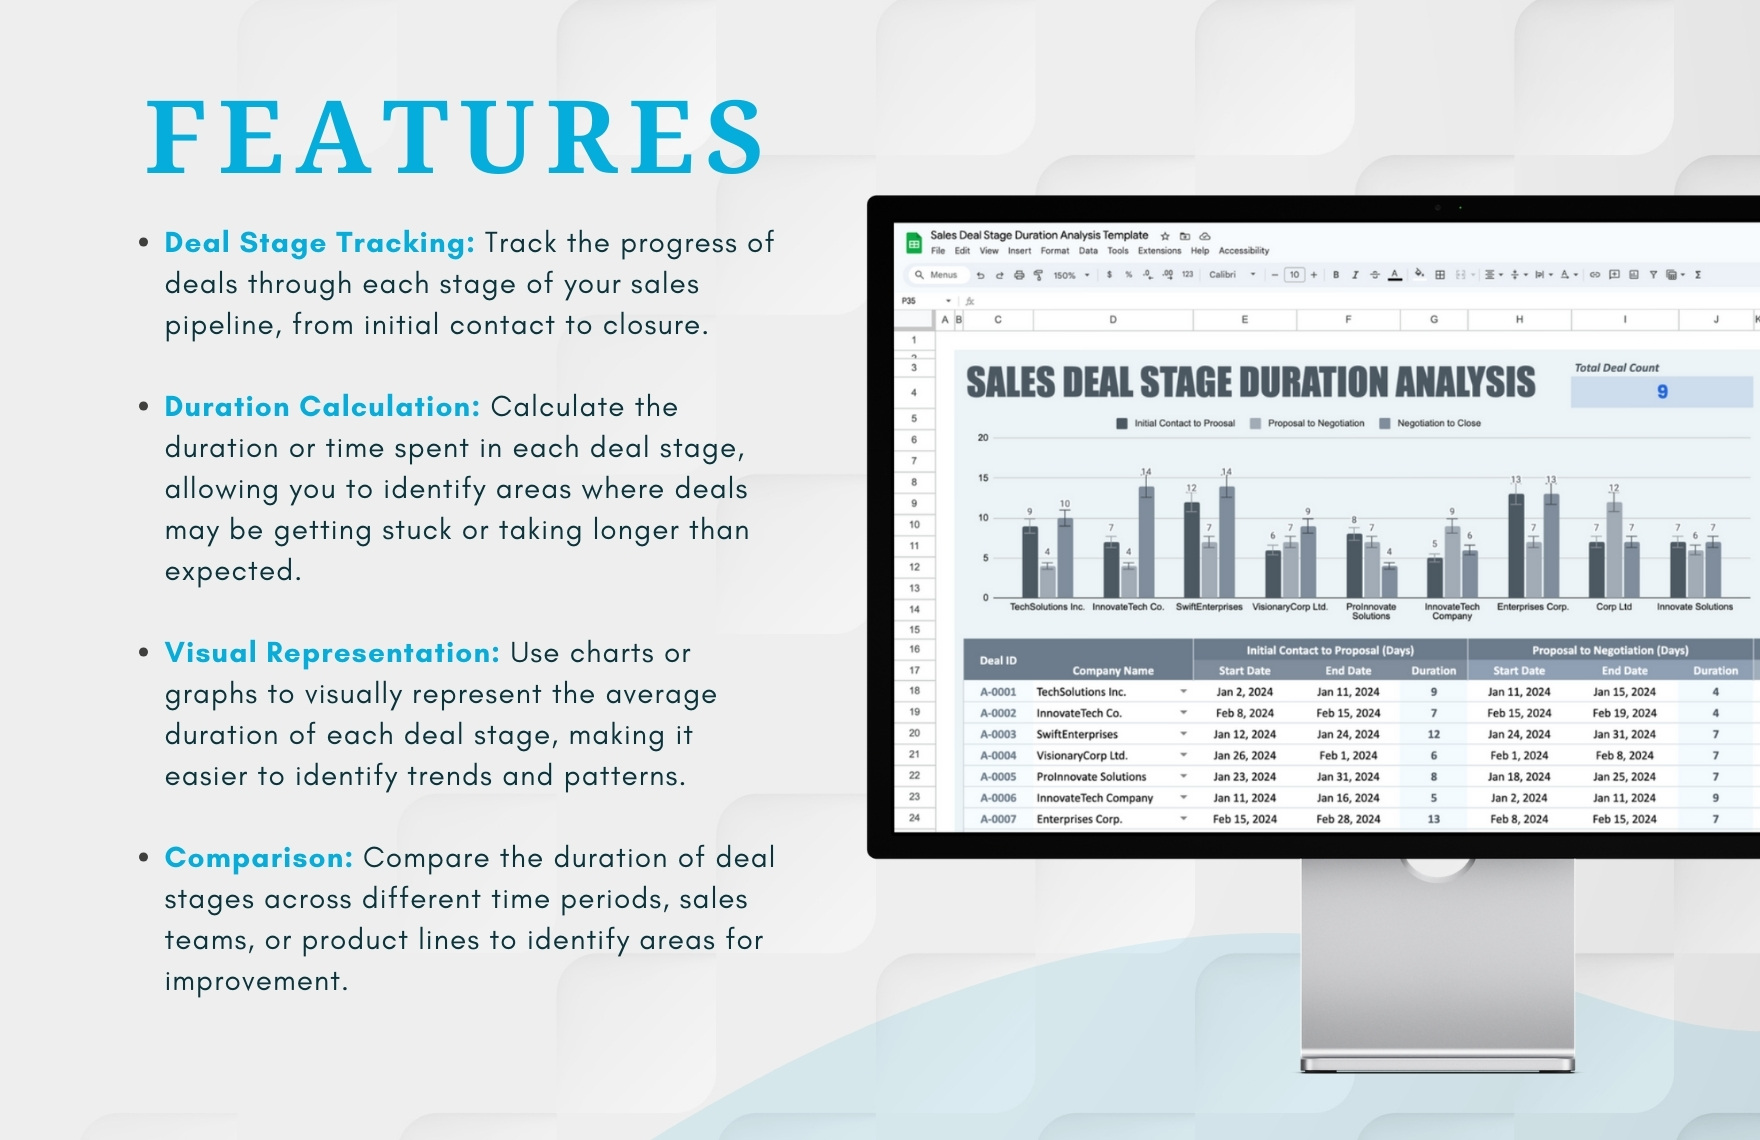 Sales Deal Stage Duration Analysis Template